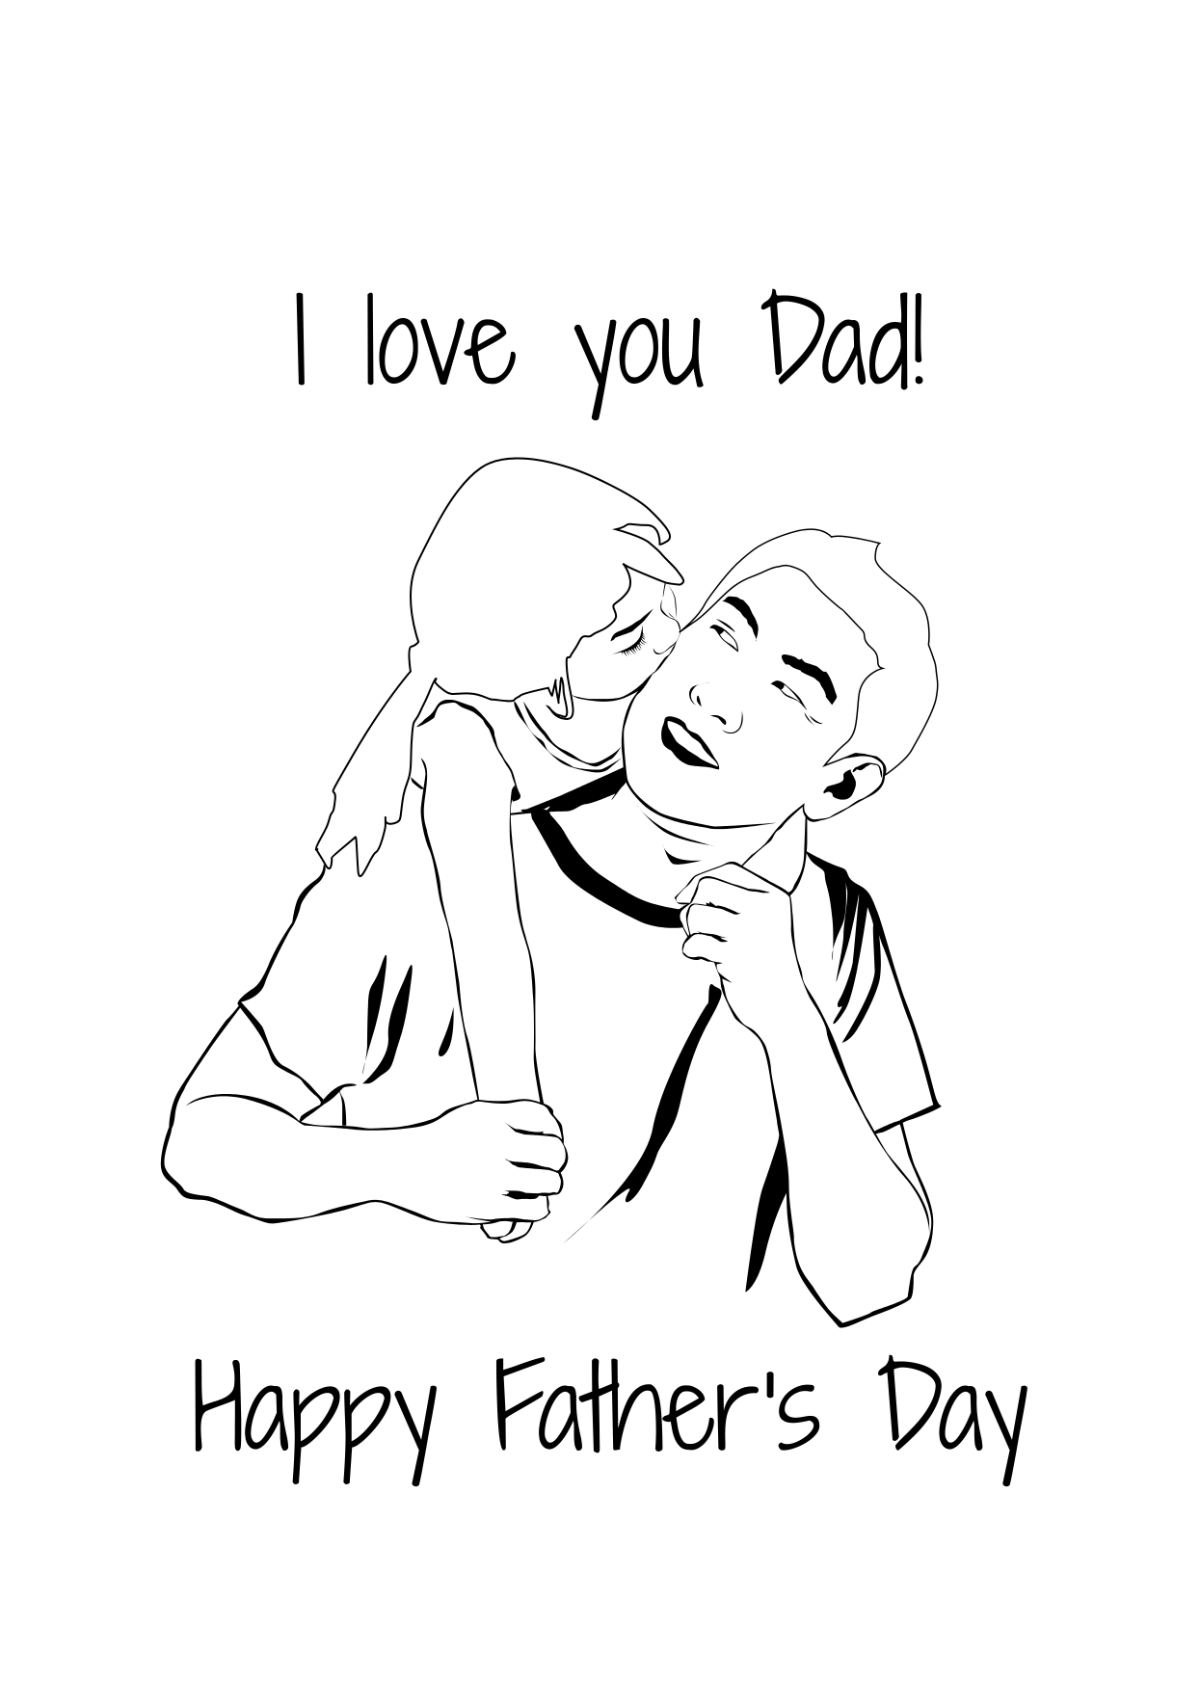 Father's Day Sketch Drawing Teamplate